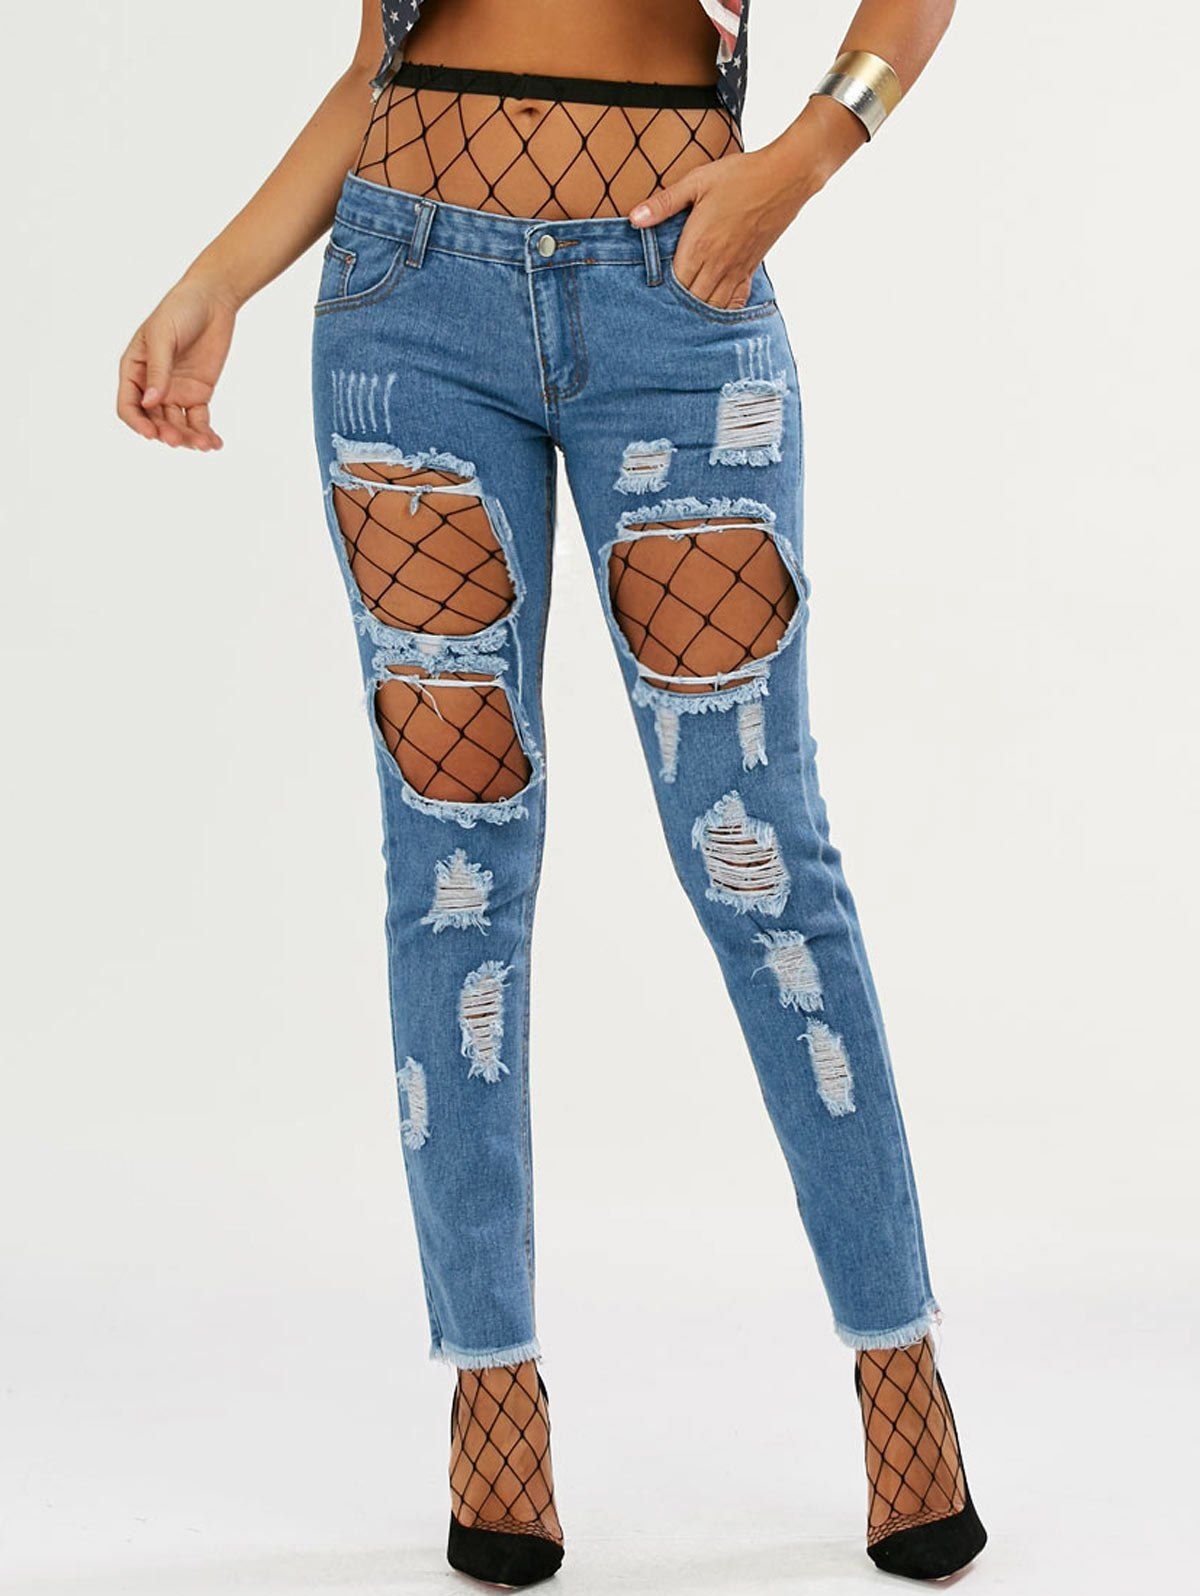 Chic High Waisted Fishnet Tights with Ninth Ripped Jeans  